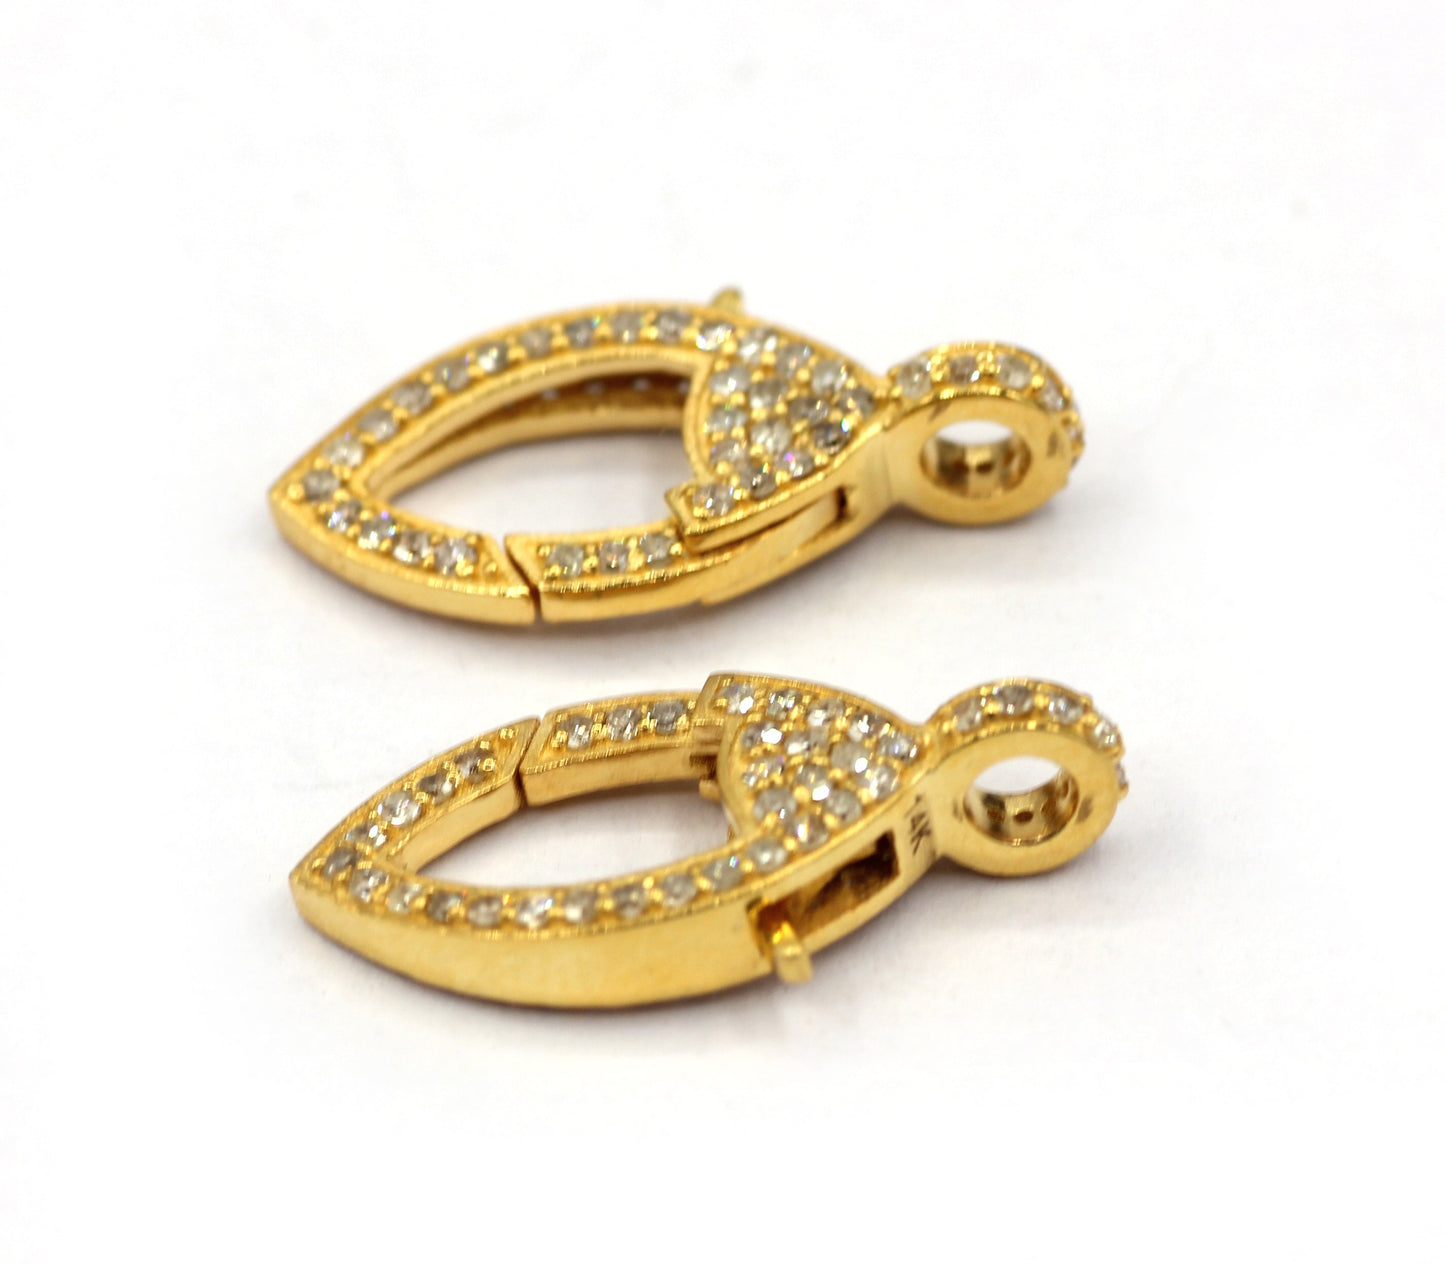 14K Solid Gold clasps, perfect for adding a unique and luxurious finish